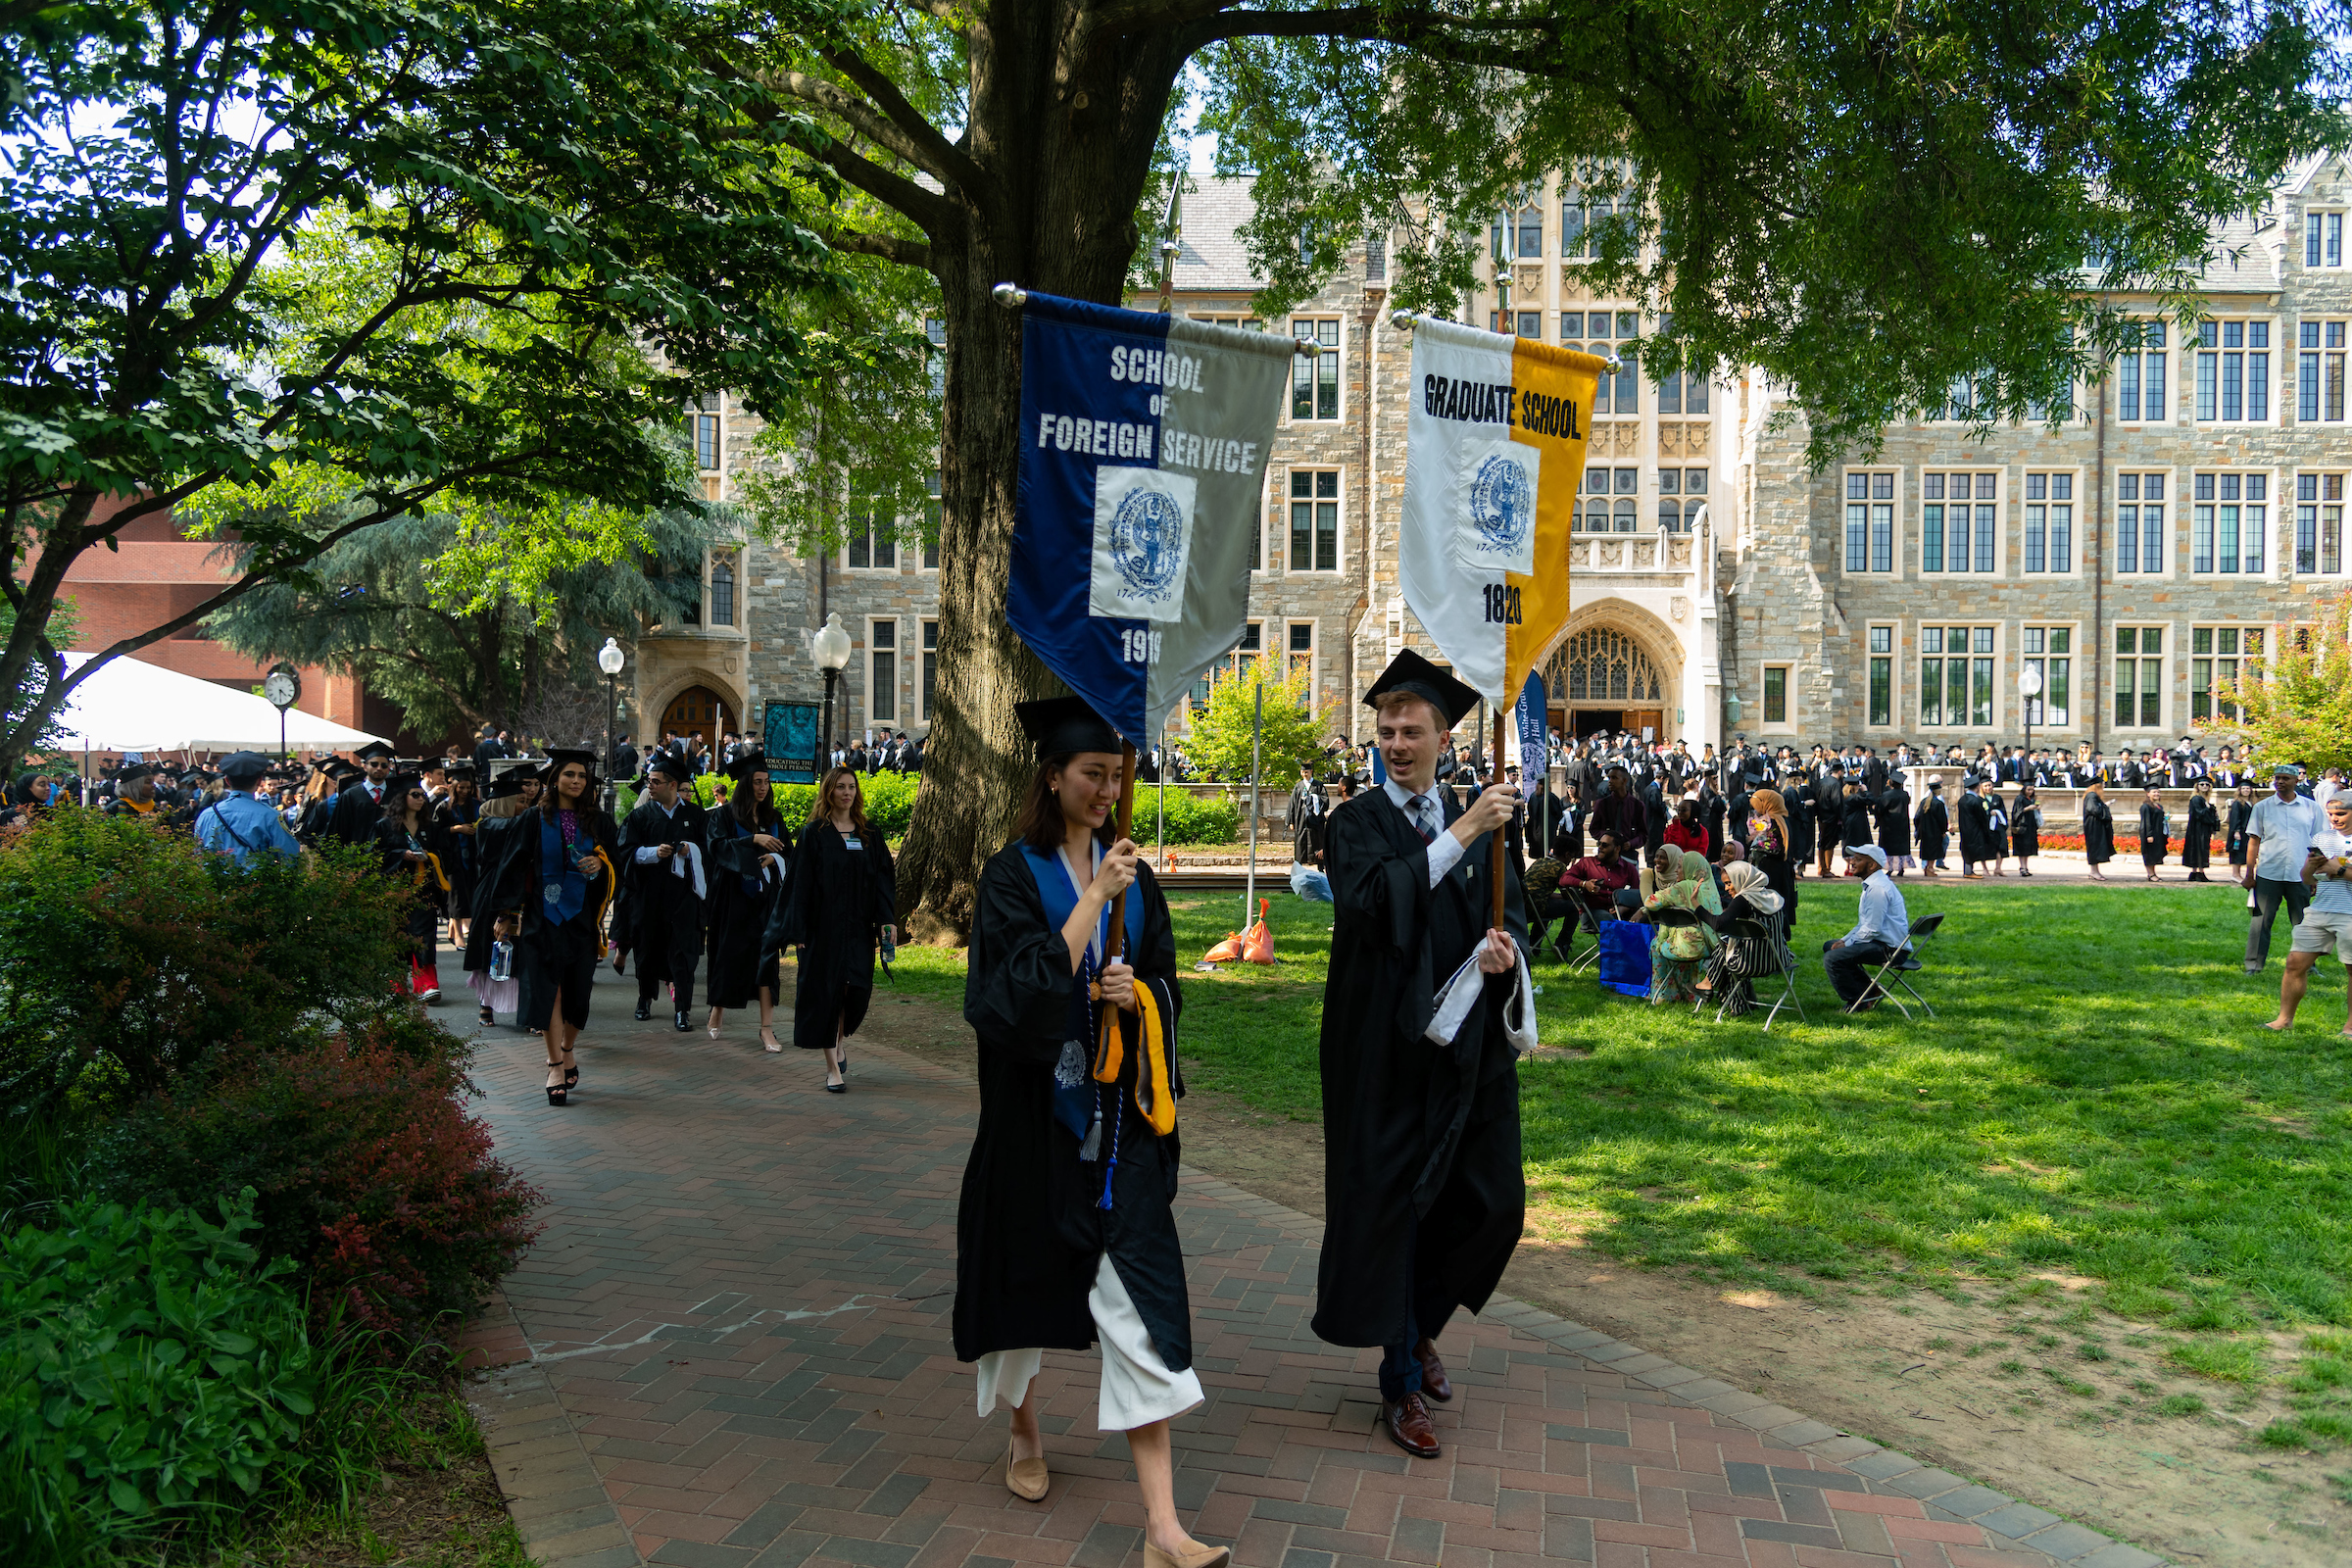 Students in caps and gowns holding "School of Foreign Service" and "Graduate School of Arts & Sciences" banners